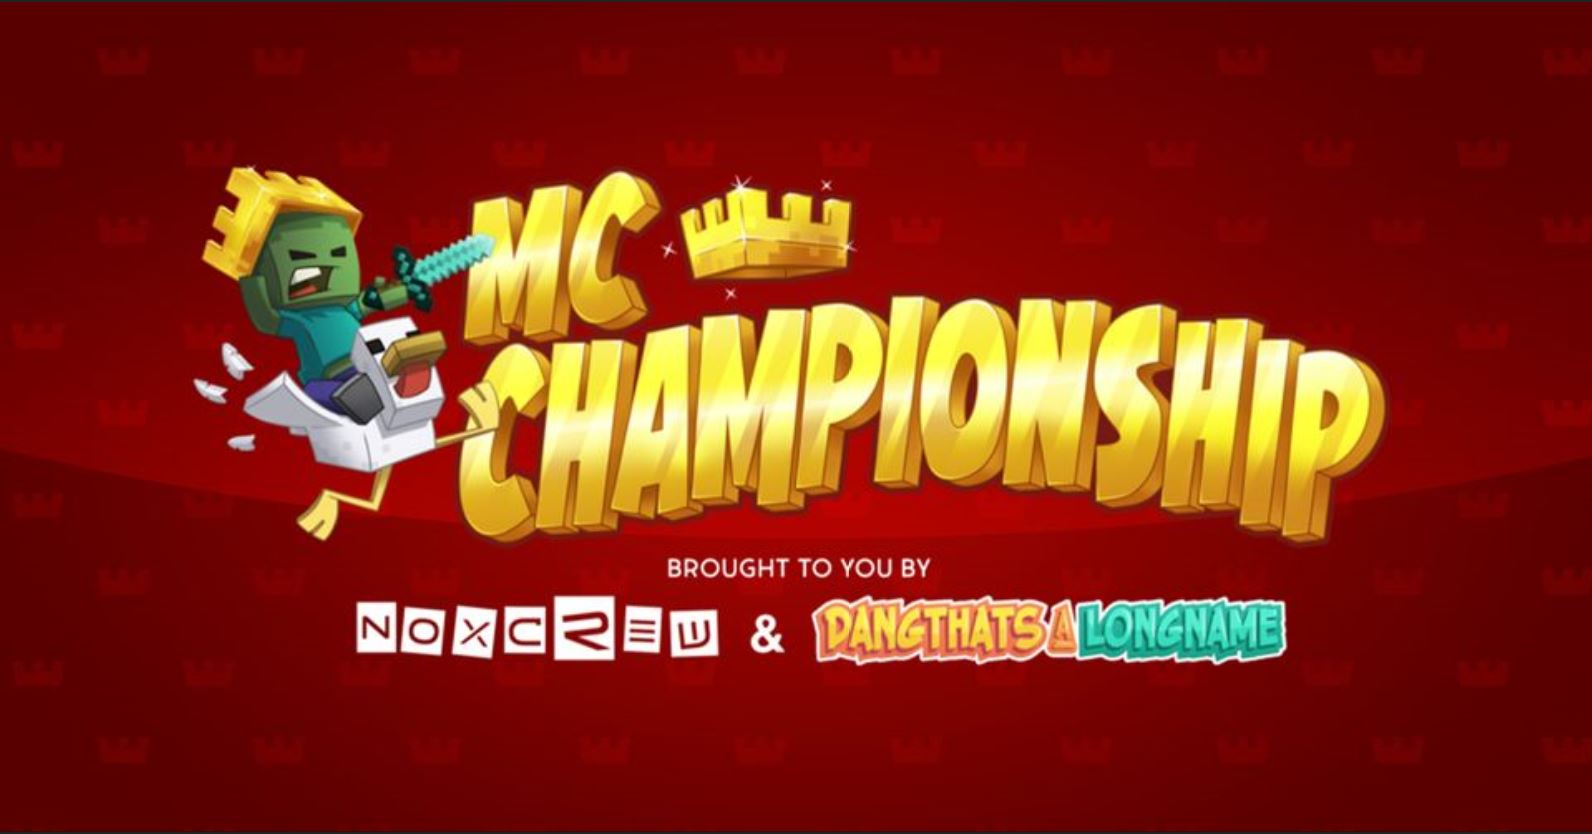 Ninth Minecraft Championship Draws In Up To 500,000 Through Both YouTube And Twitch Streams!